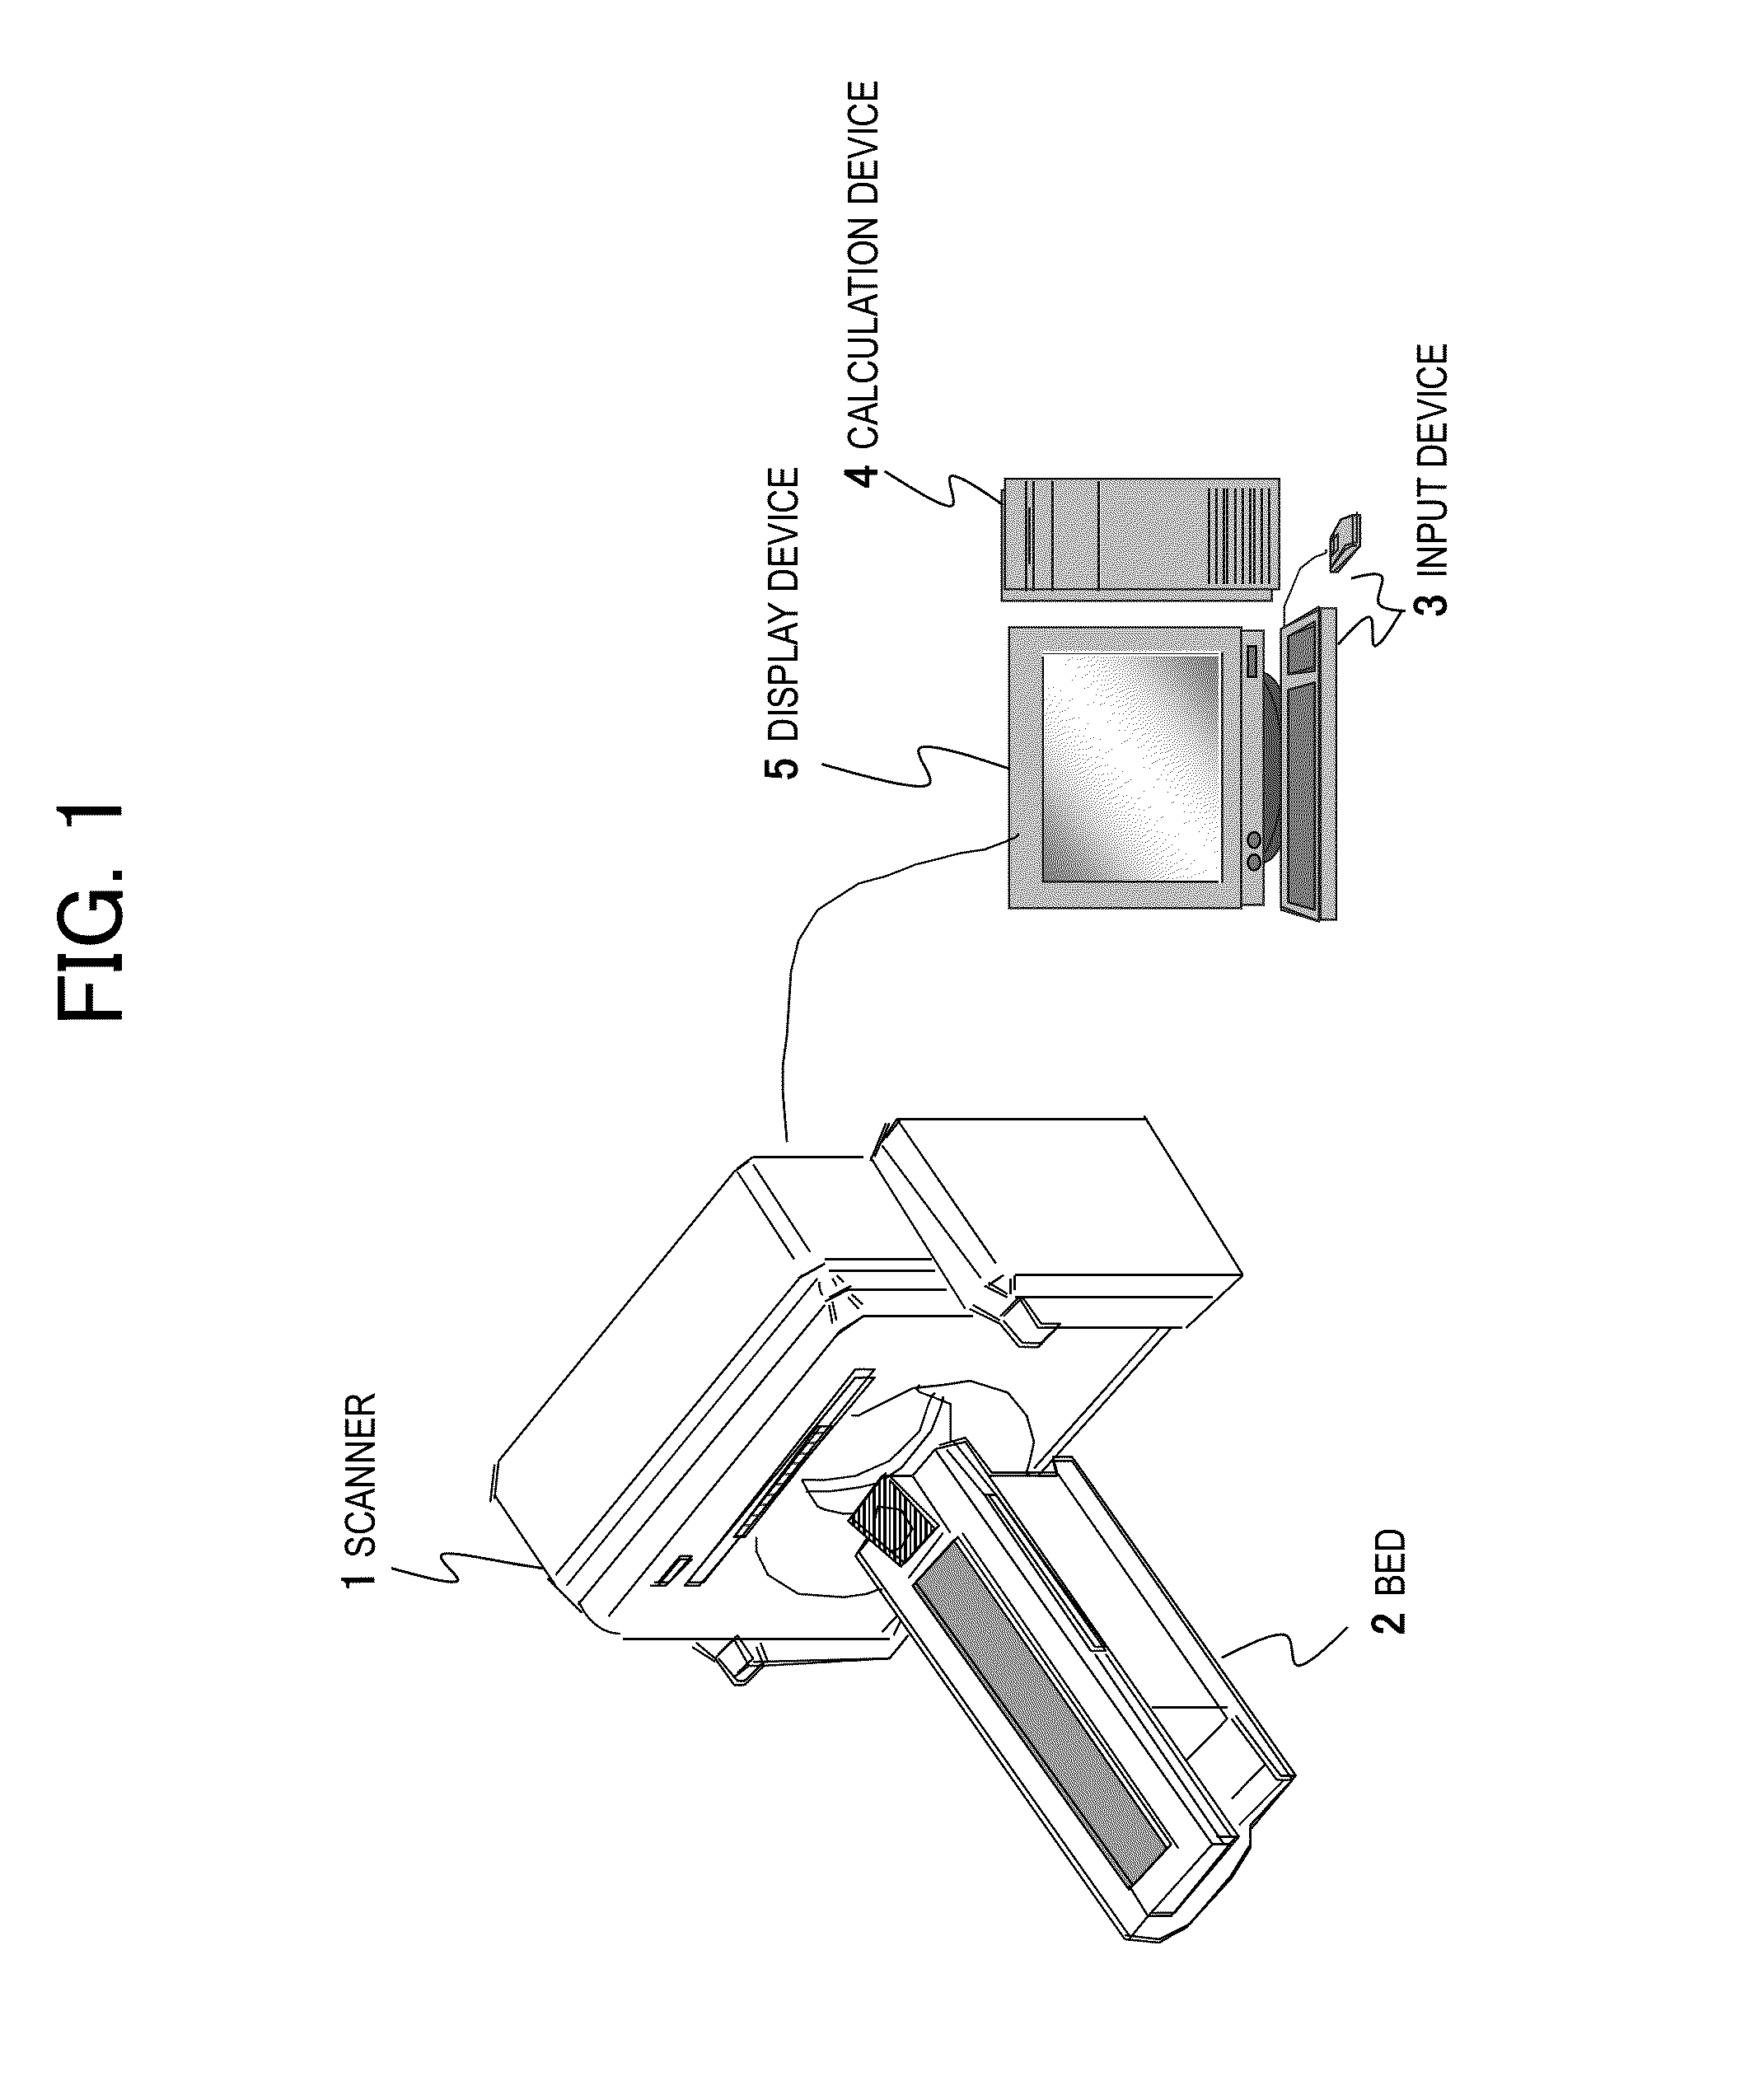 X-ray CT apparatus and correction processing device